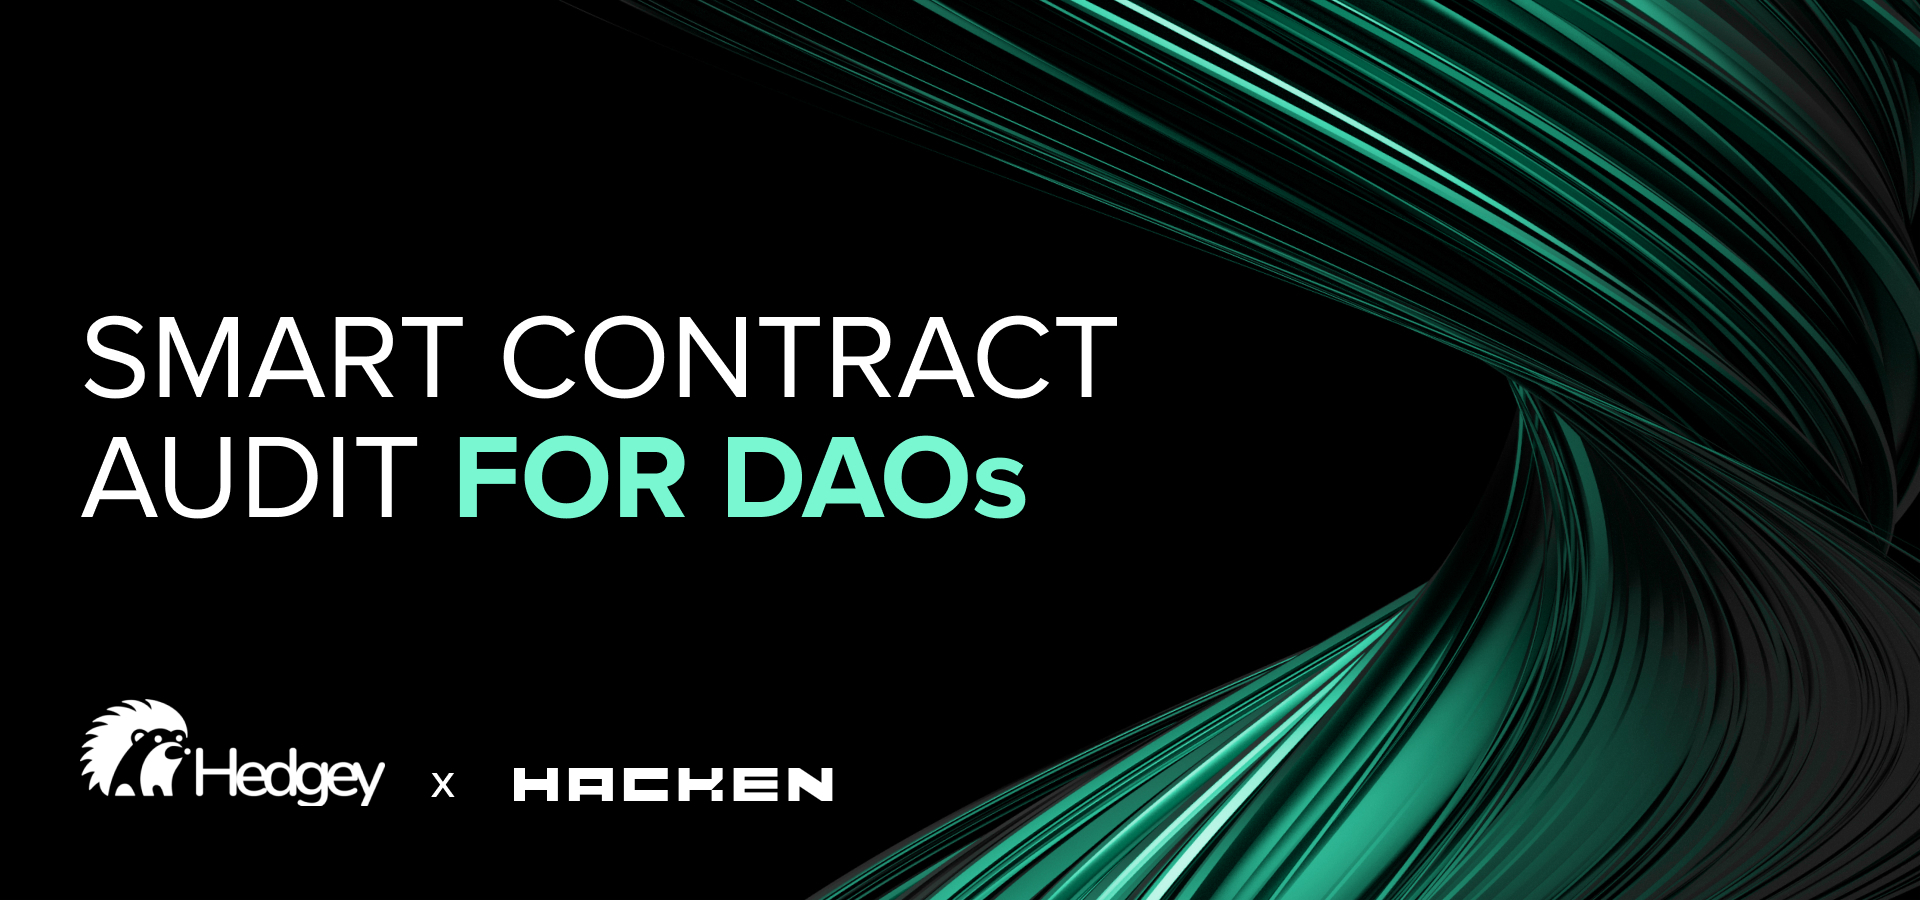 Hacken & Hedgey: the true value of smart contract audit for DAOs